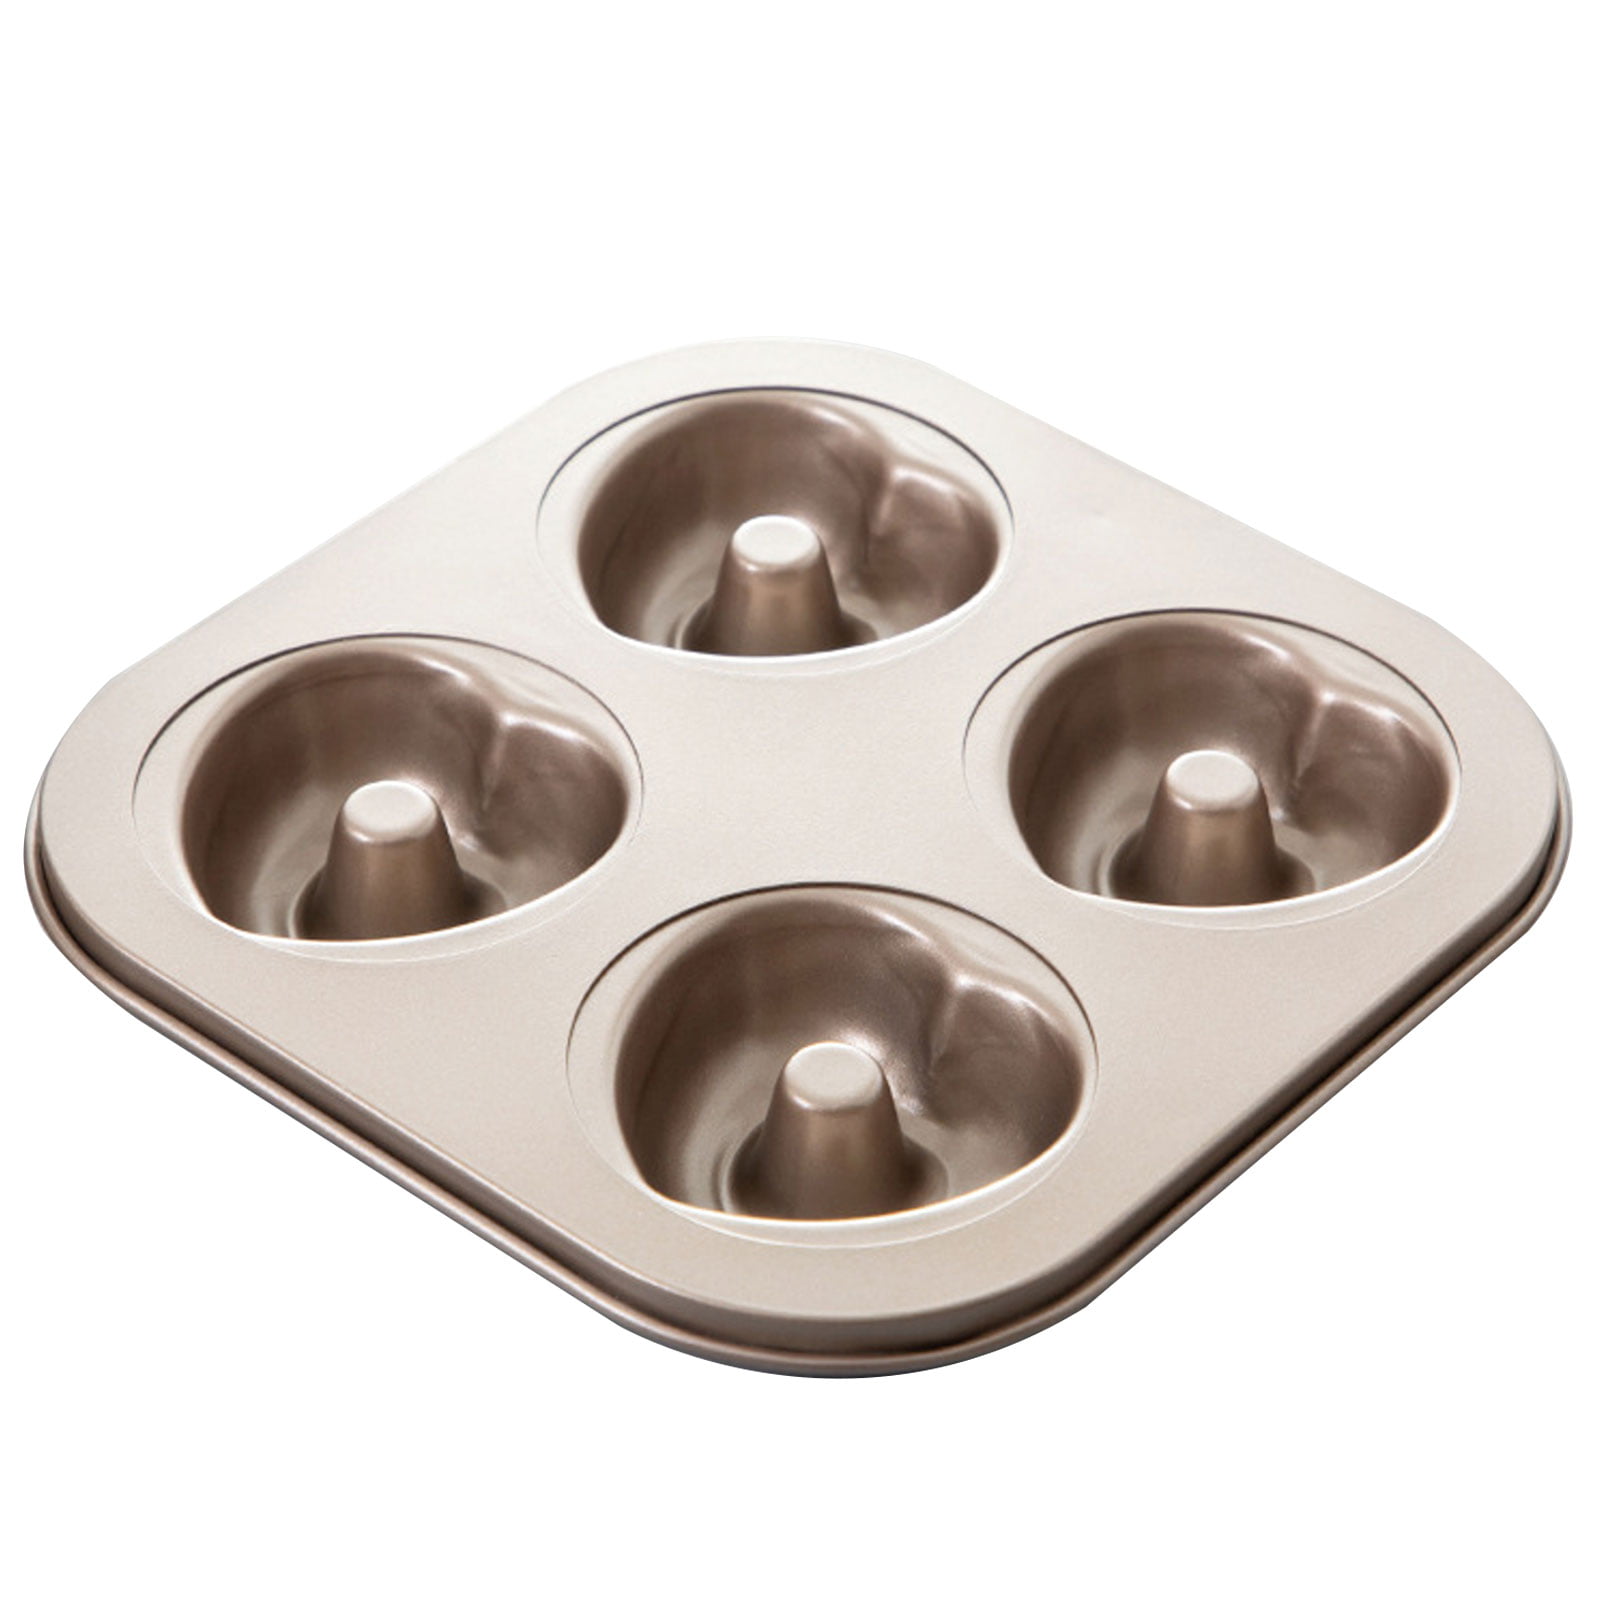 Dusdombr Donut Baking Molds Easy to Clean 4 Pcs Pumpkin Shaped Cake Bagel Biscuit Baking Pan Easy to Bake 